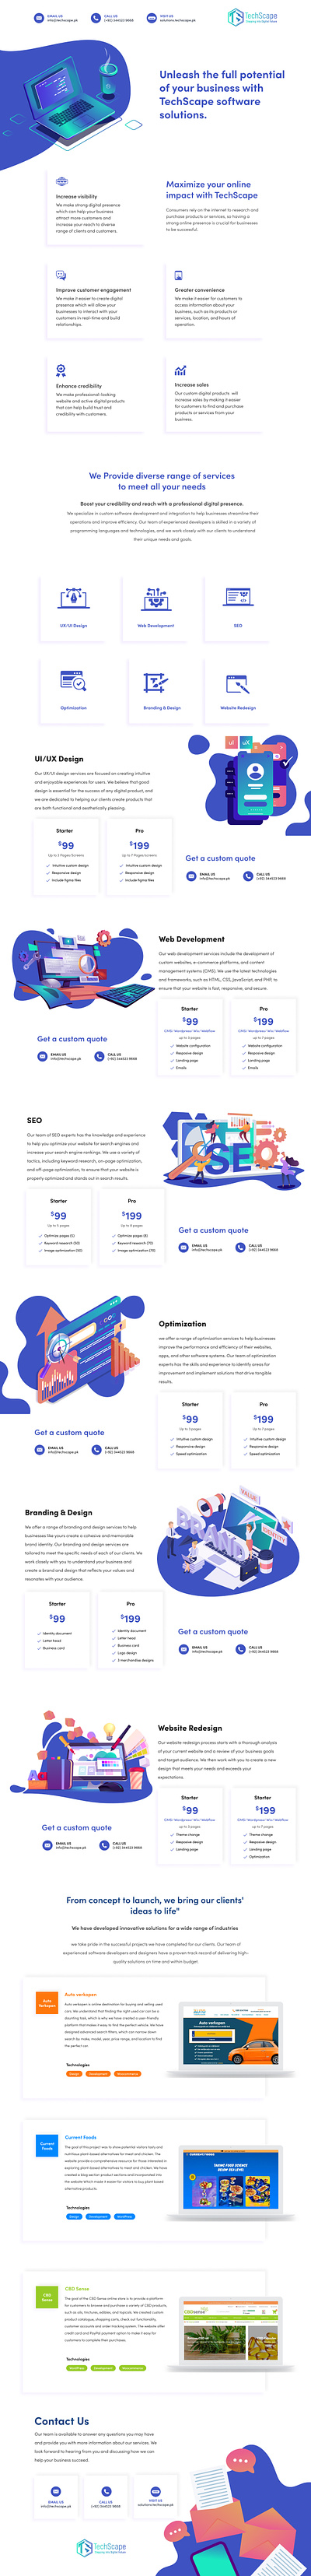 TechScape Software Solutions Email Marketing Template Design adobe illustrartor email marketing graphic design landing page software house ui ui design web design website design